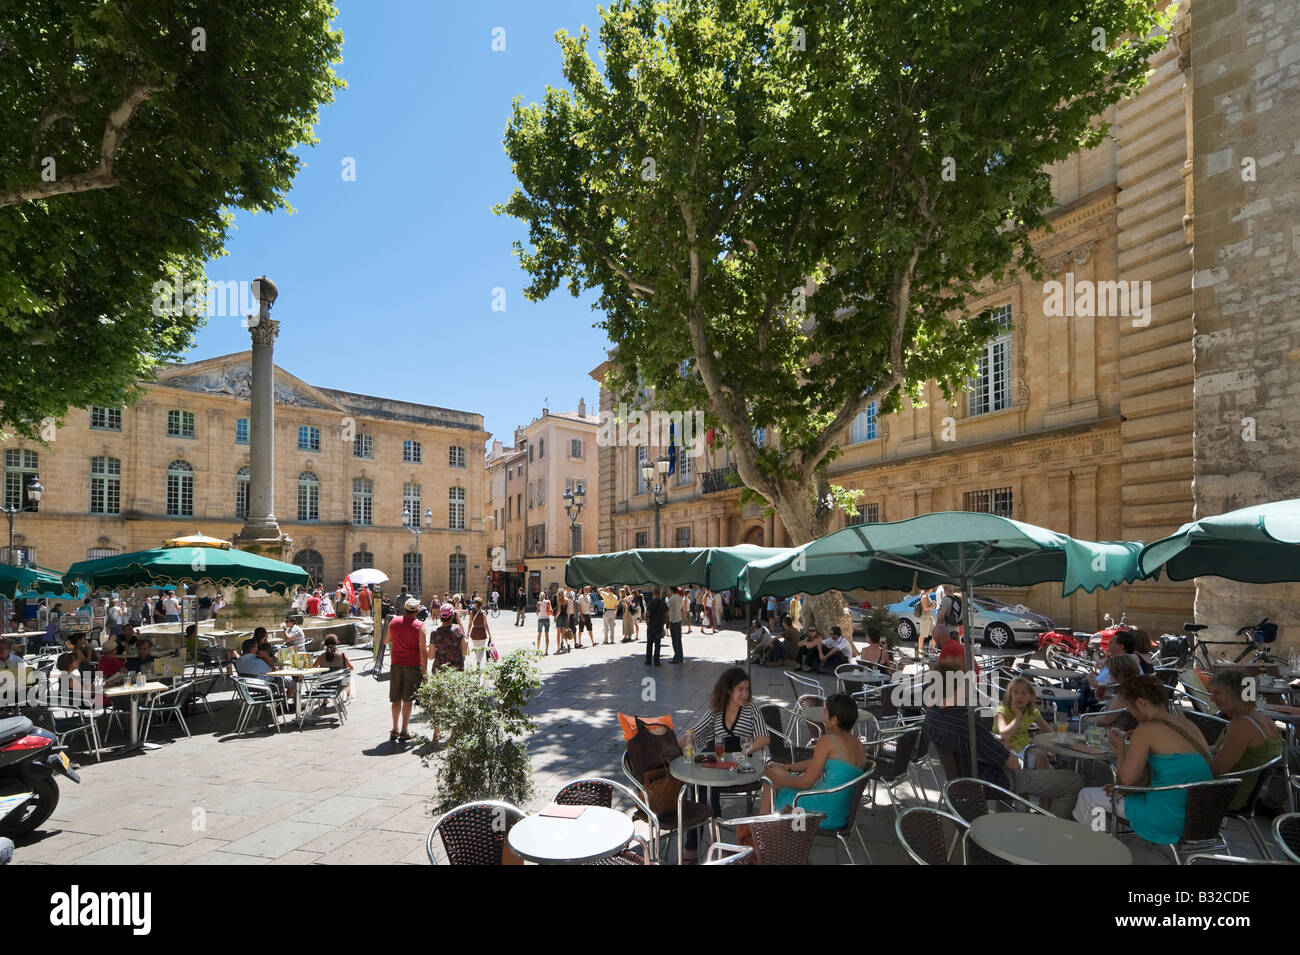 Street cafe in the Place de l'Hotel de Ville with the Town Hall behind, Aix en Provence, France Stock Photo